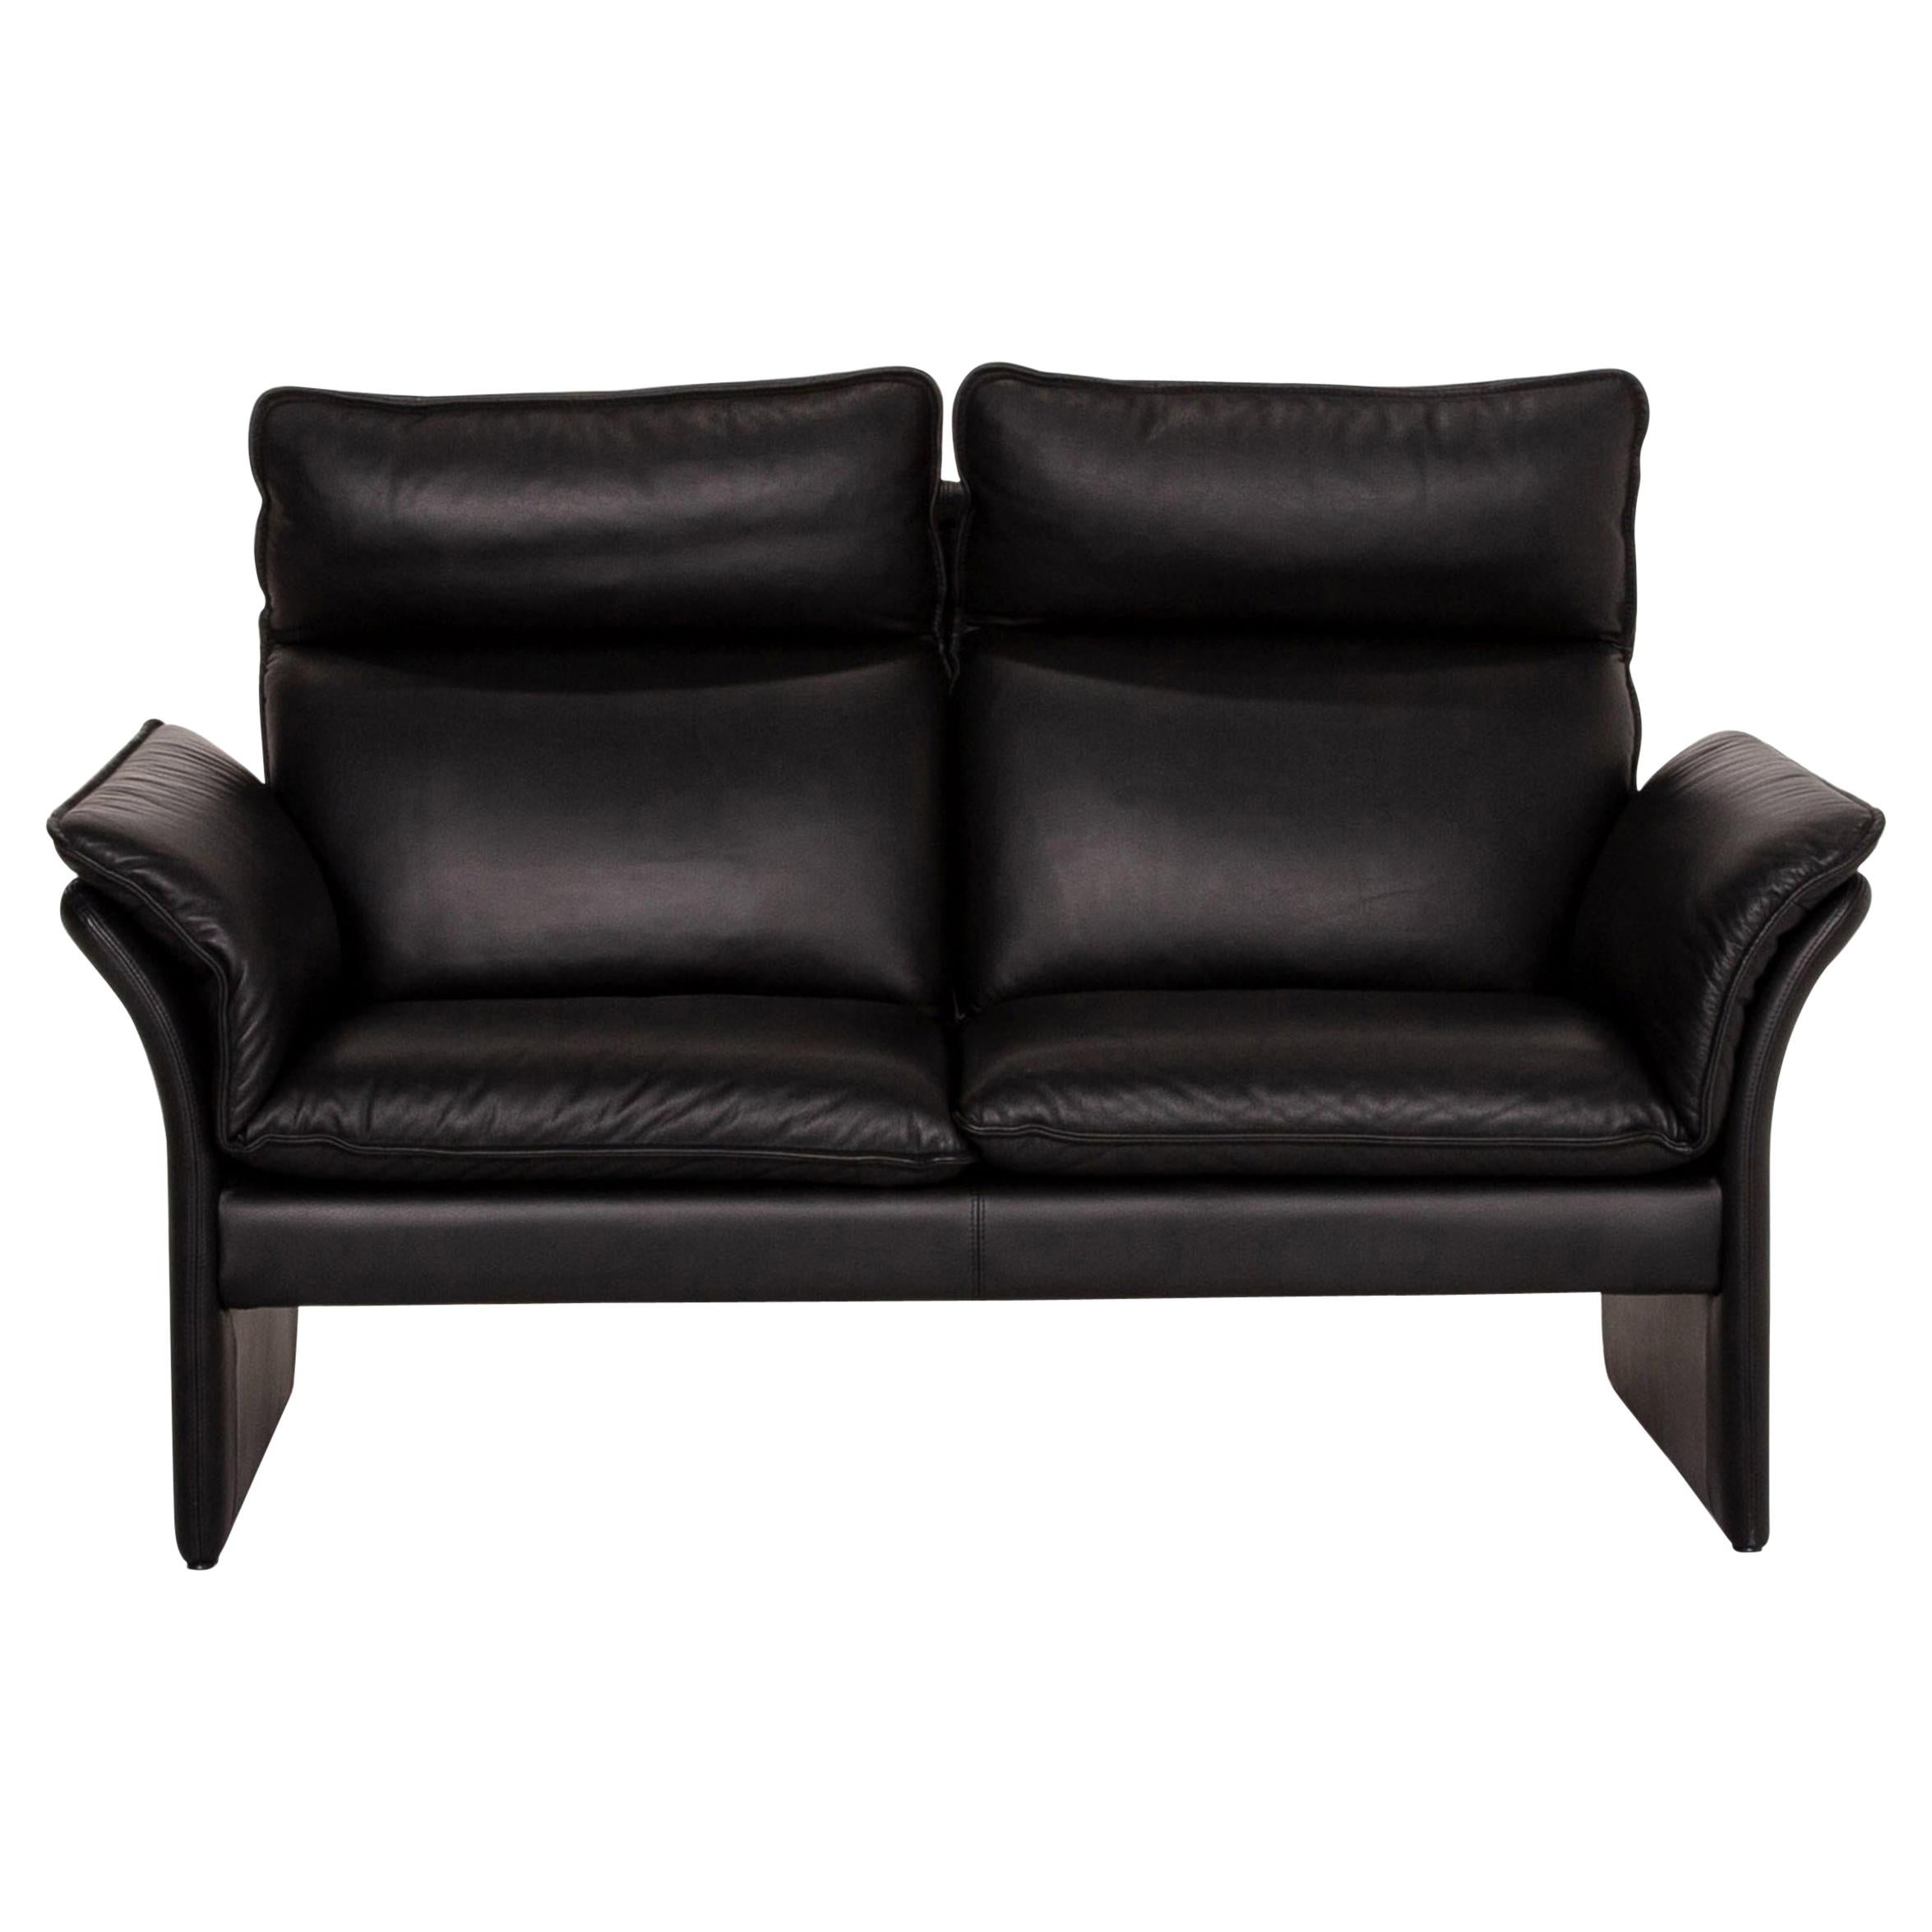 Three-Point Scala Leather Sofa Black Two-Seat Couch